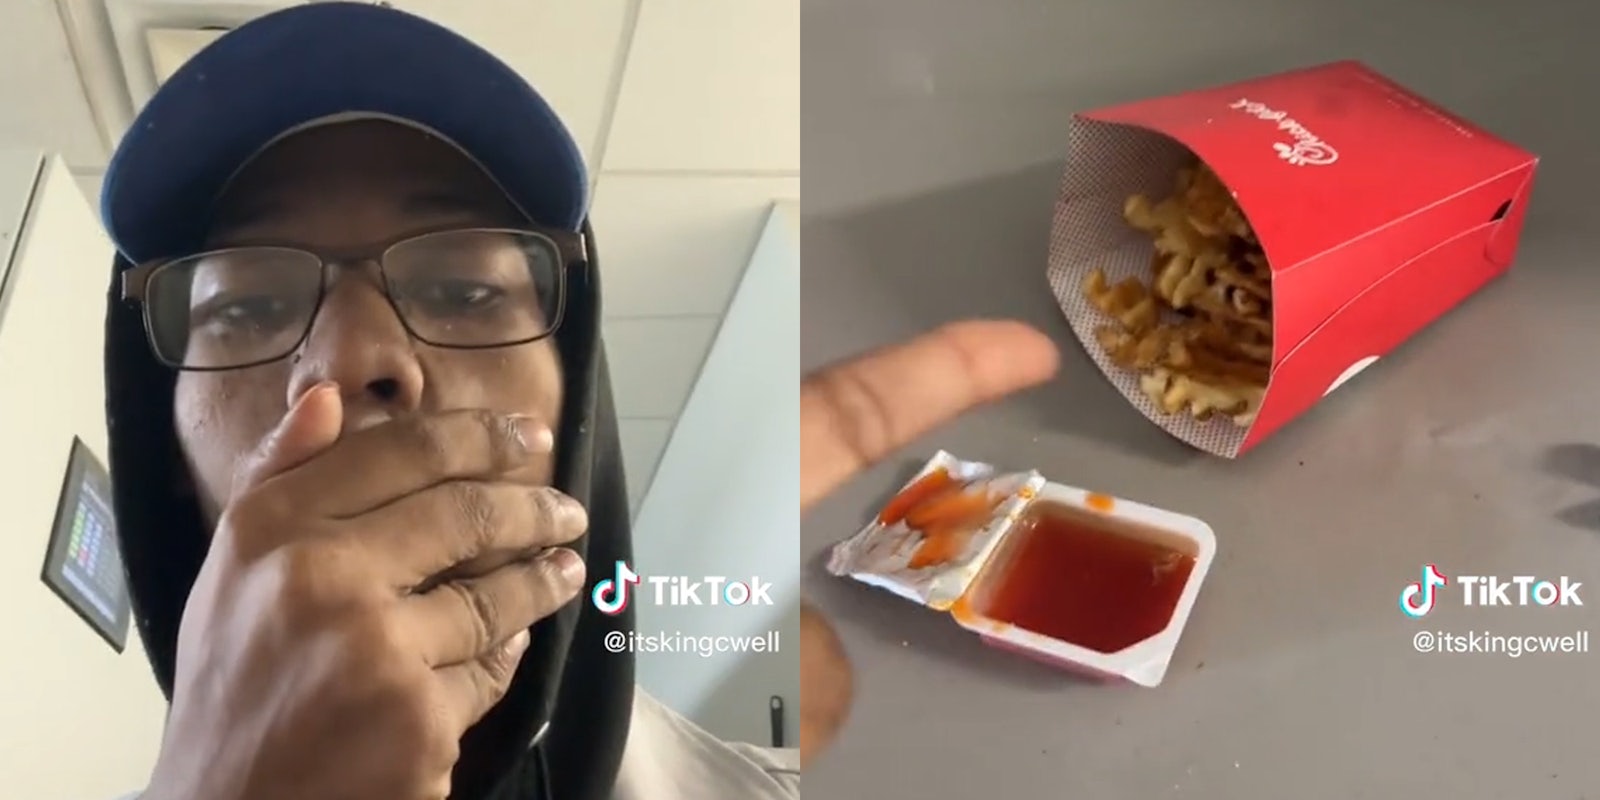 man covering mouth (l) chick fil a fries and sauce (r)